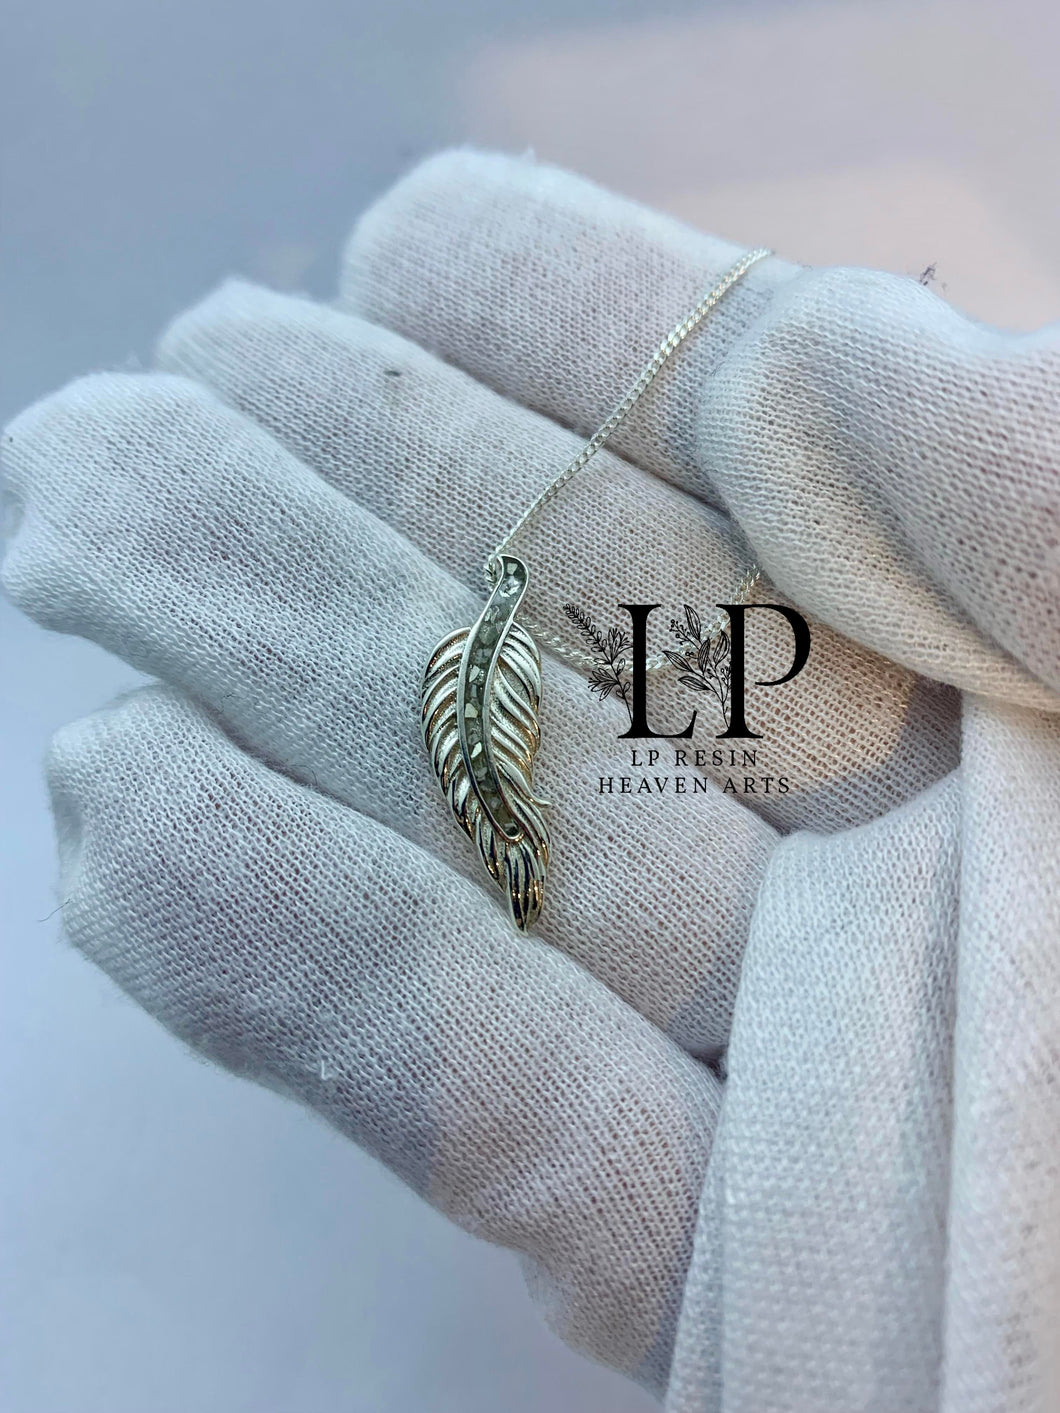 Feather pendant in silver